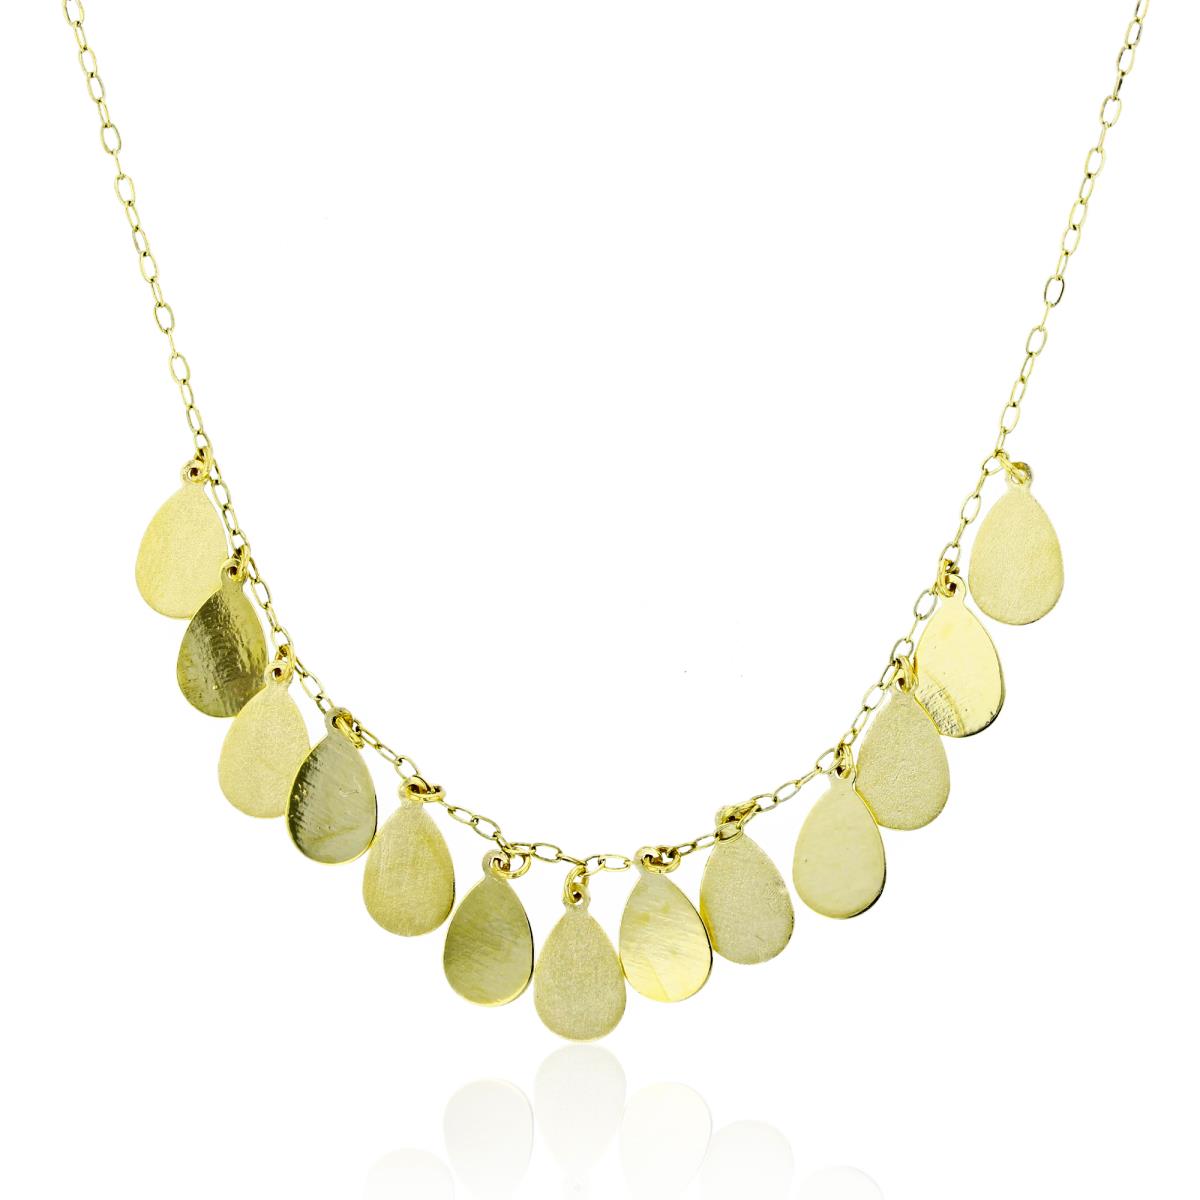 10K Yellow Gold Polished Pear Dangling 17" Necklace